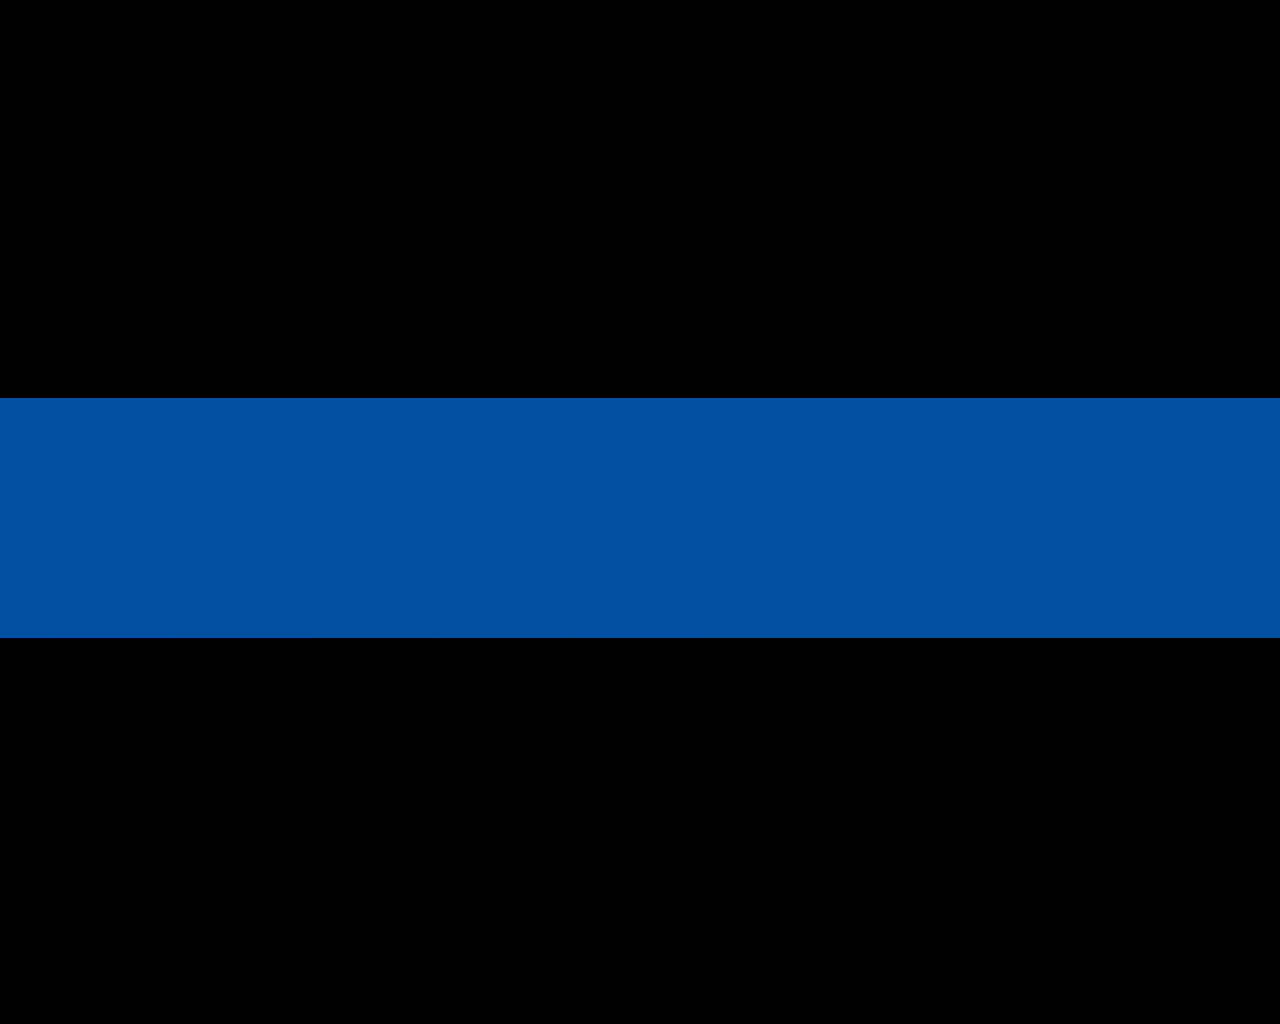 The Thin Blue Line Image